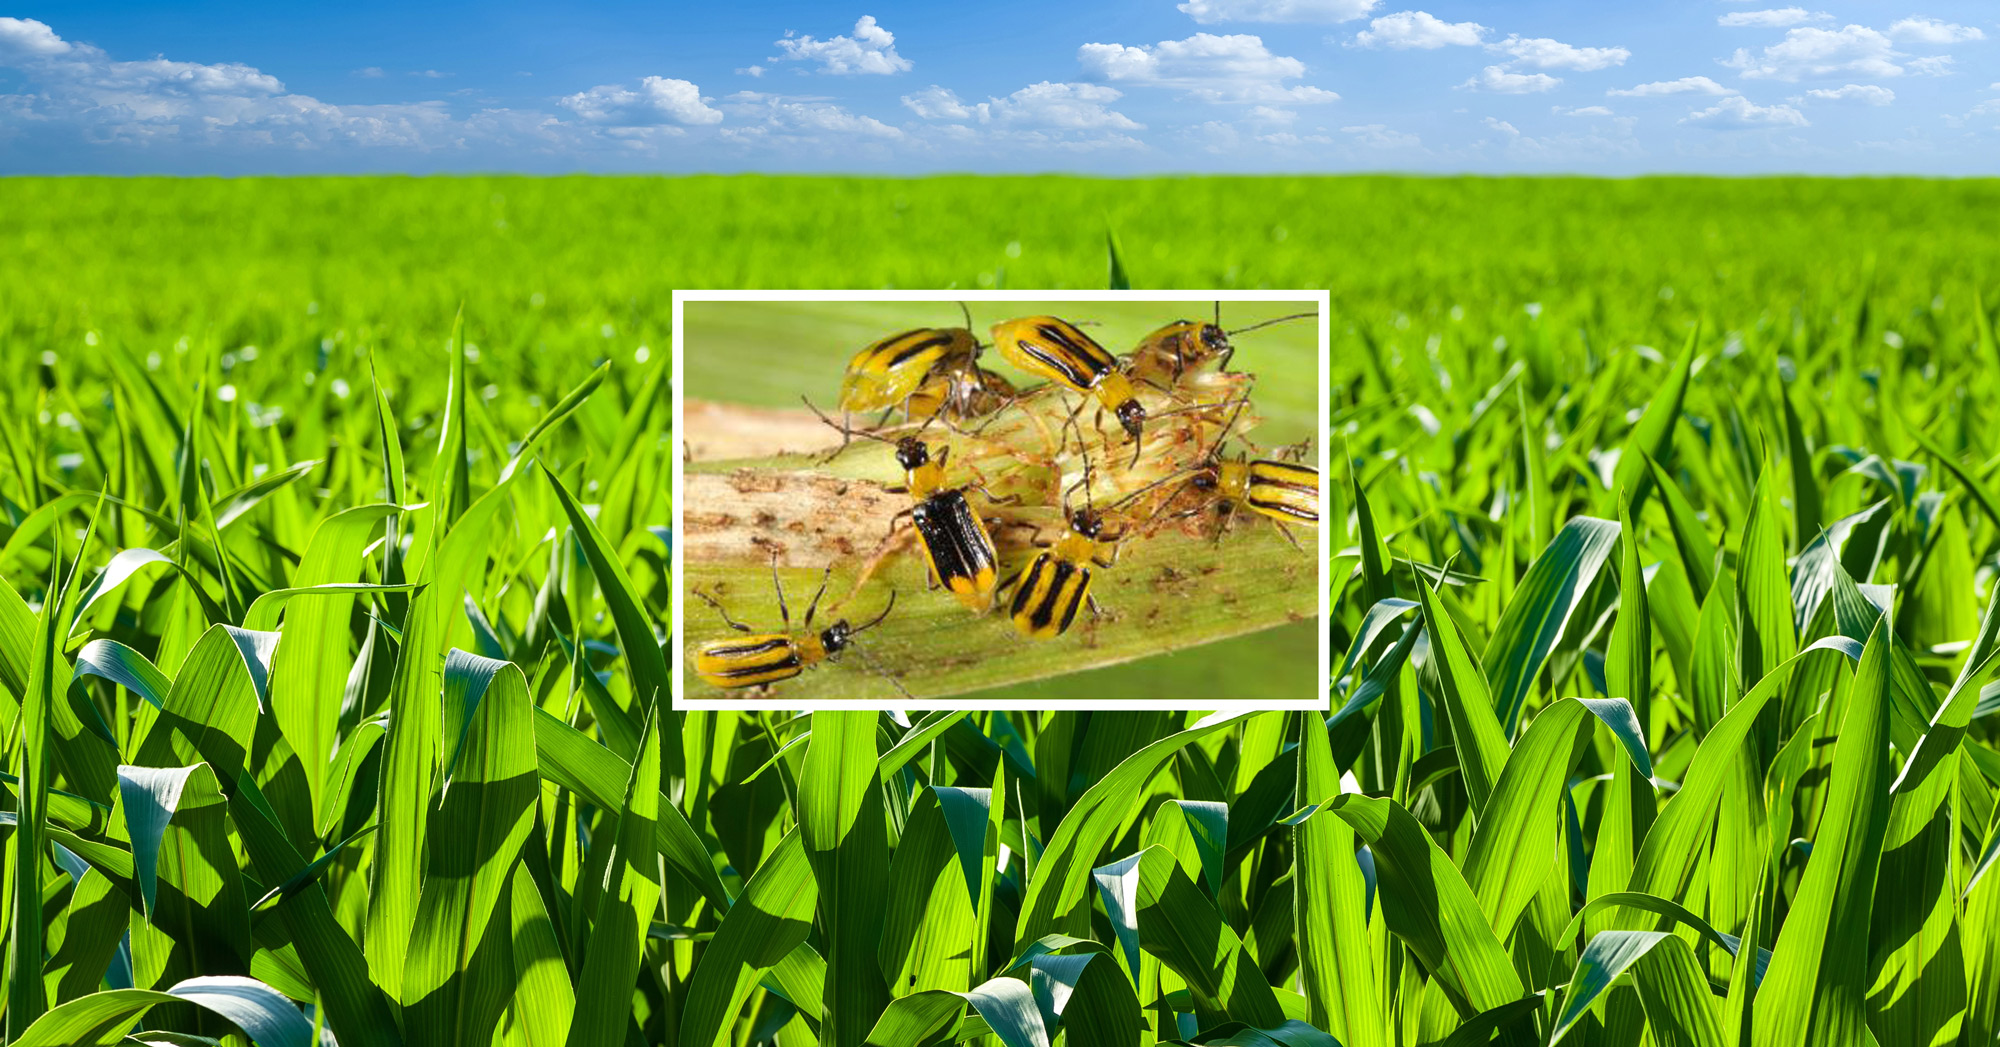 Corn field with western corn rootworms